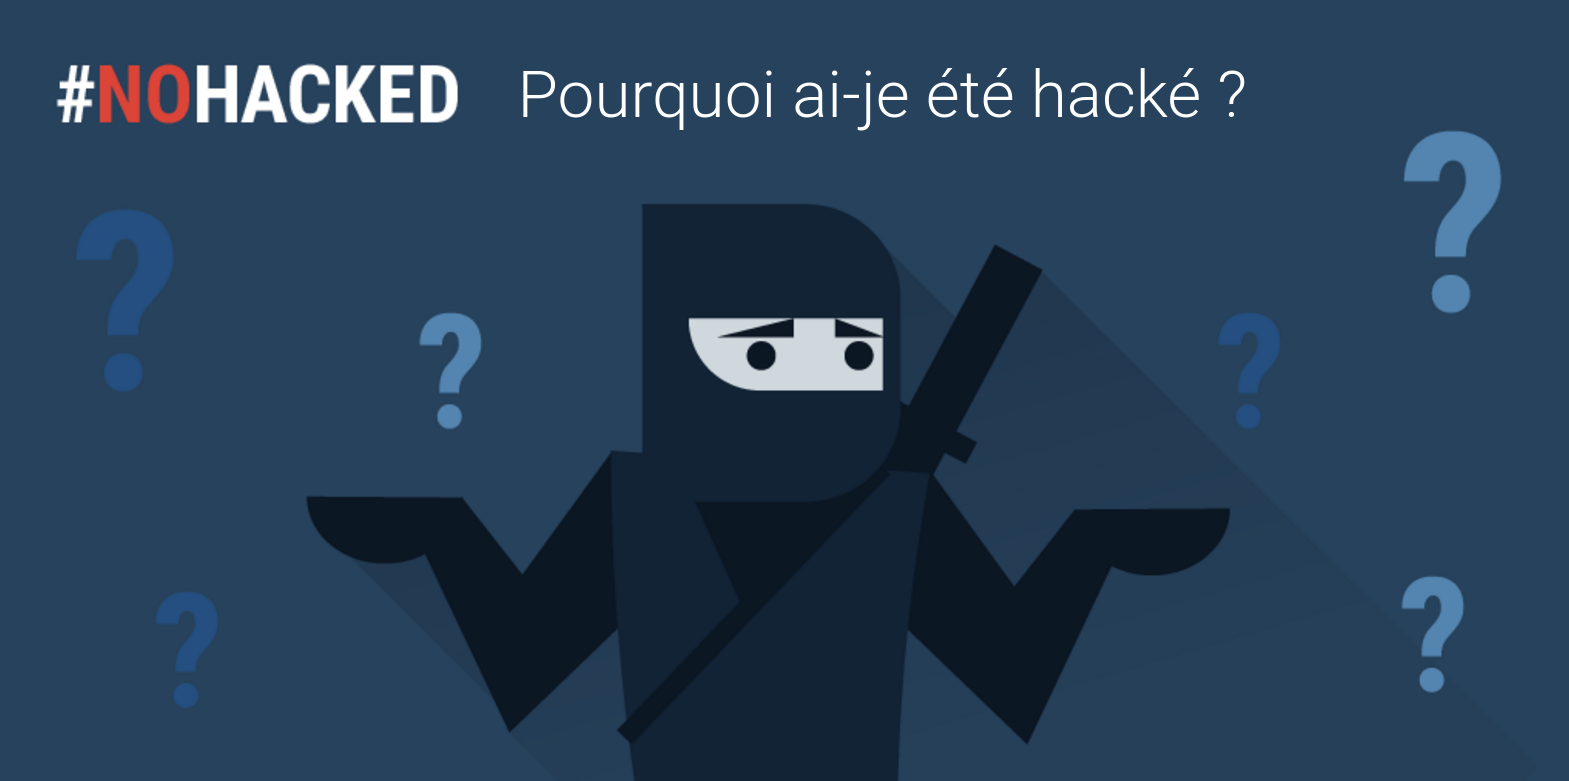 7 Things To Do After Getting Hacked